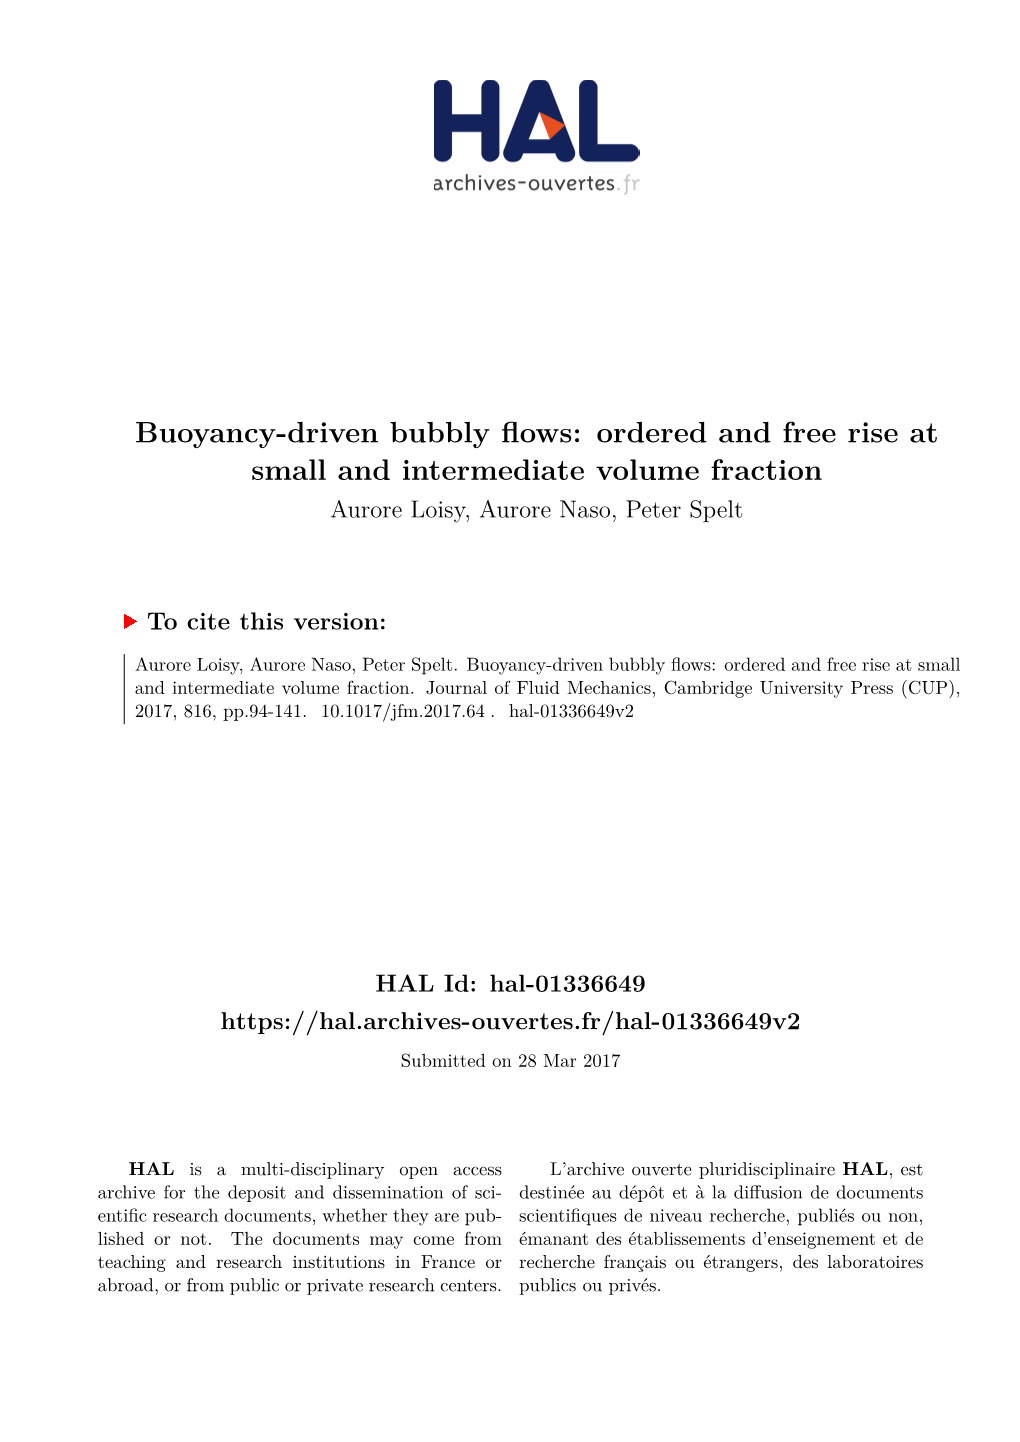 Buoyancy-Driven Bubbly Flows: Ordered and Free Rise at Small and Intermediate Volume Fraction Aurore Loisy, Aurore Naso, Peter Spelt